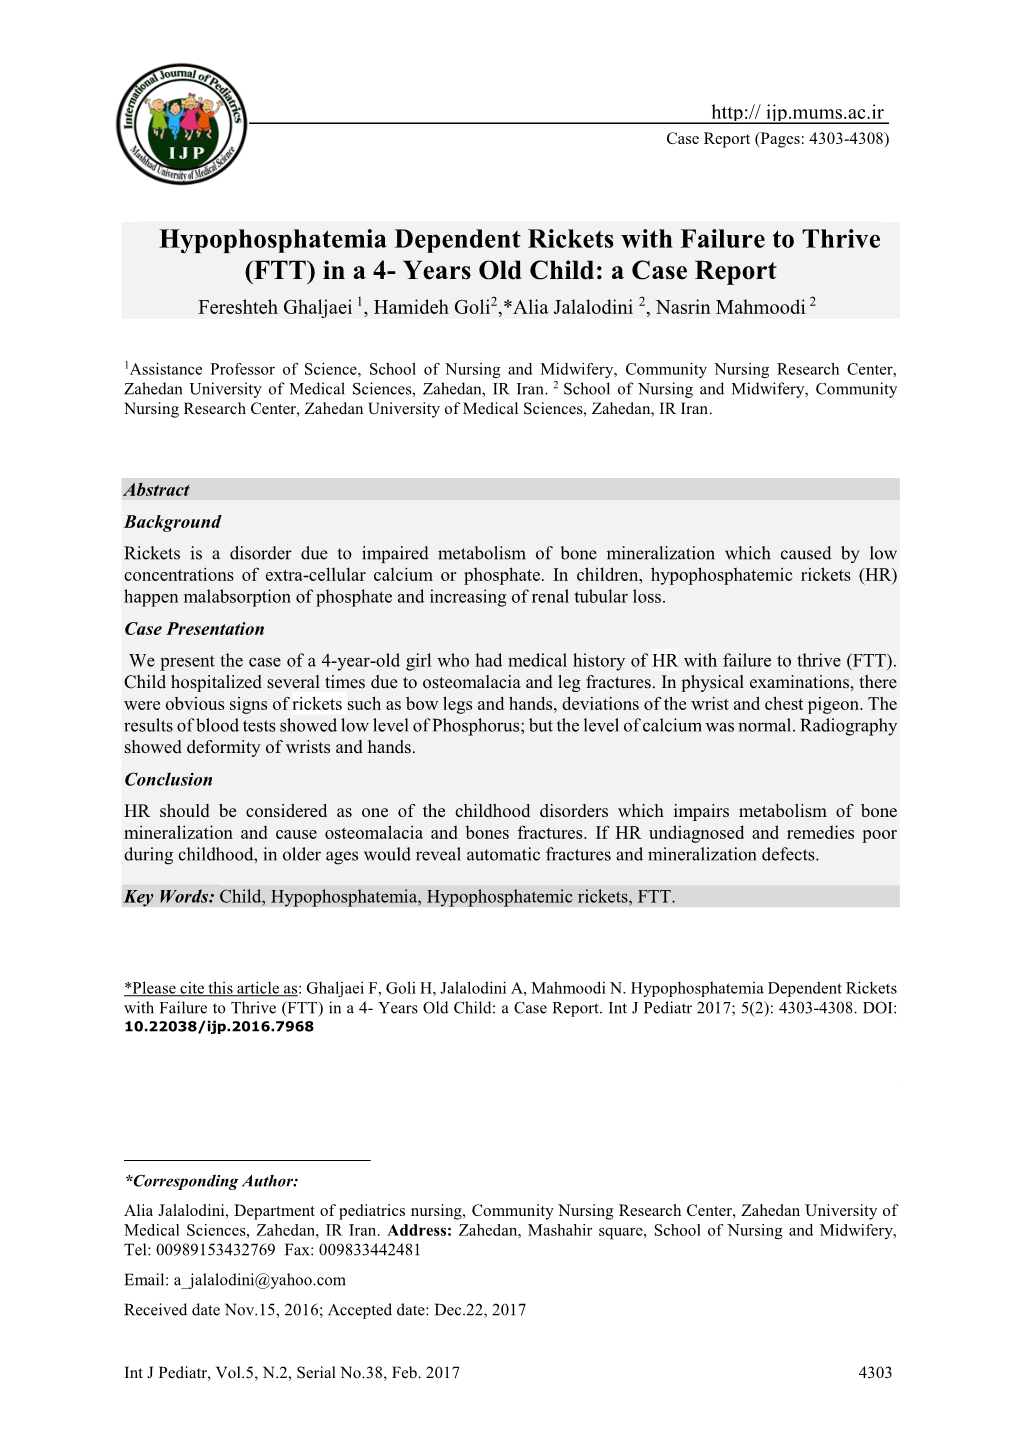 Hypophosphatemia Dependent Rickets with Failure to Thrive (FTT)